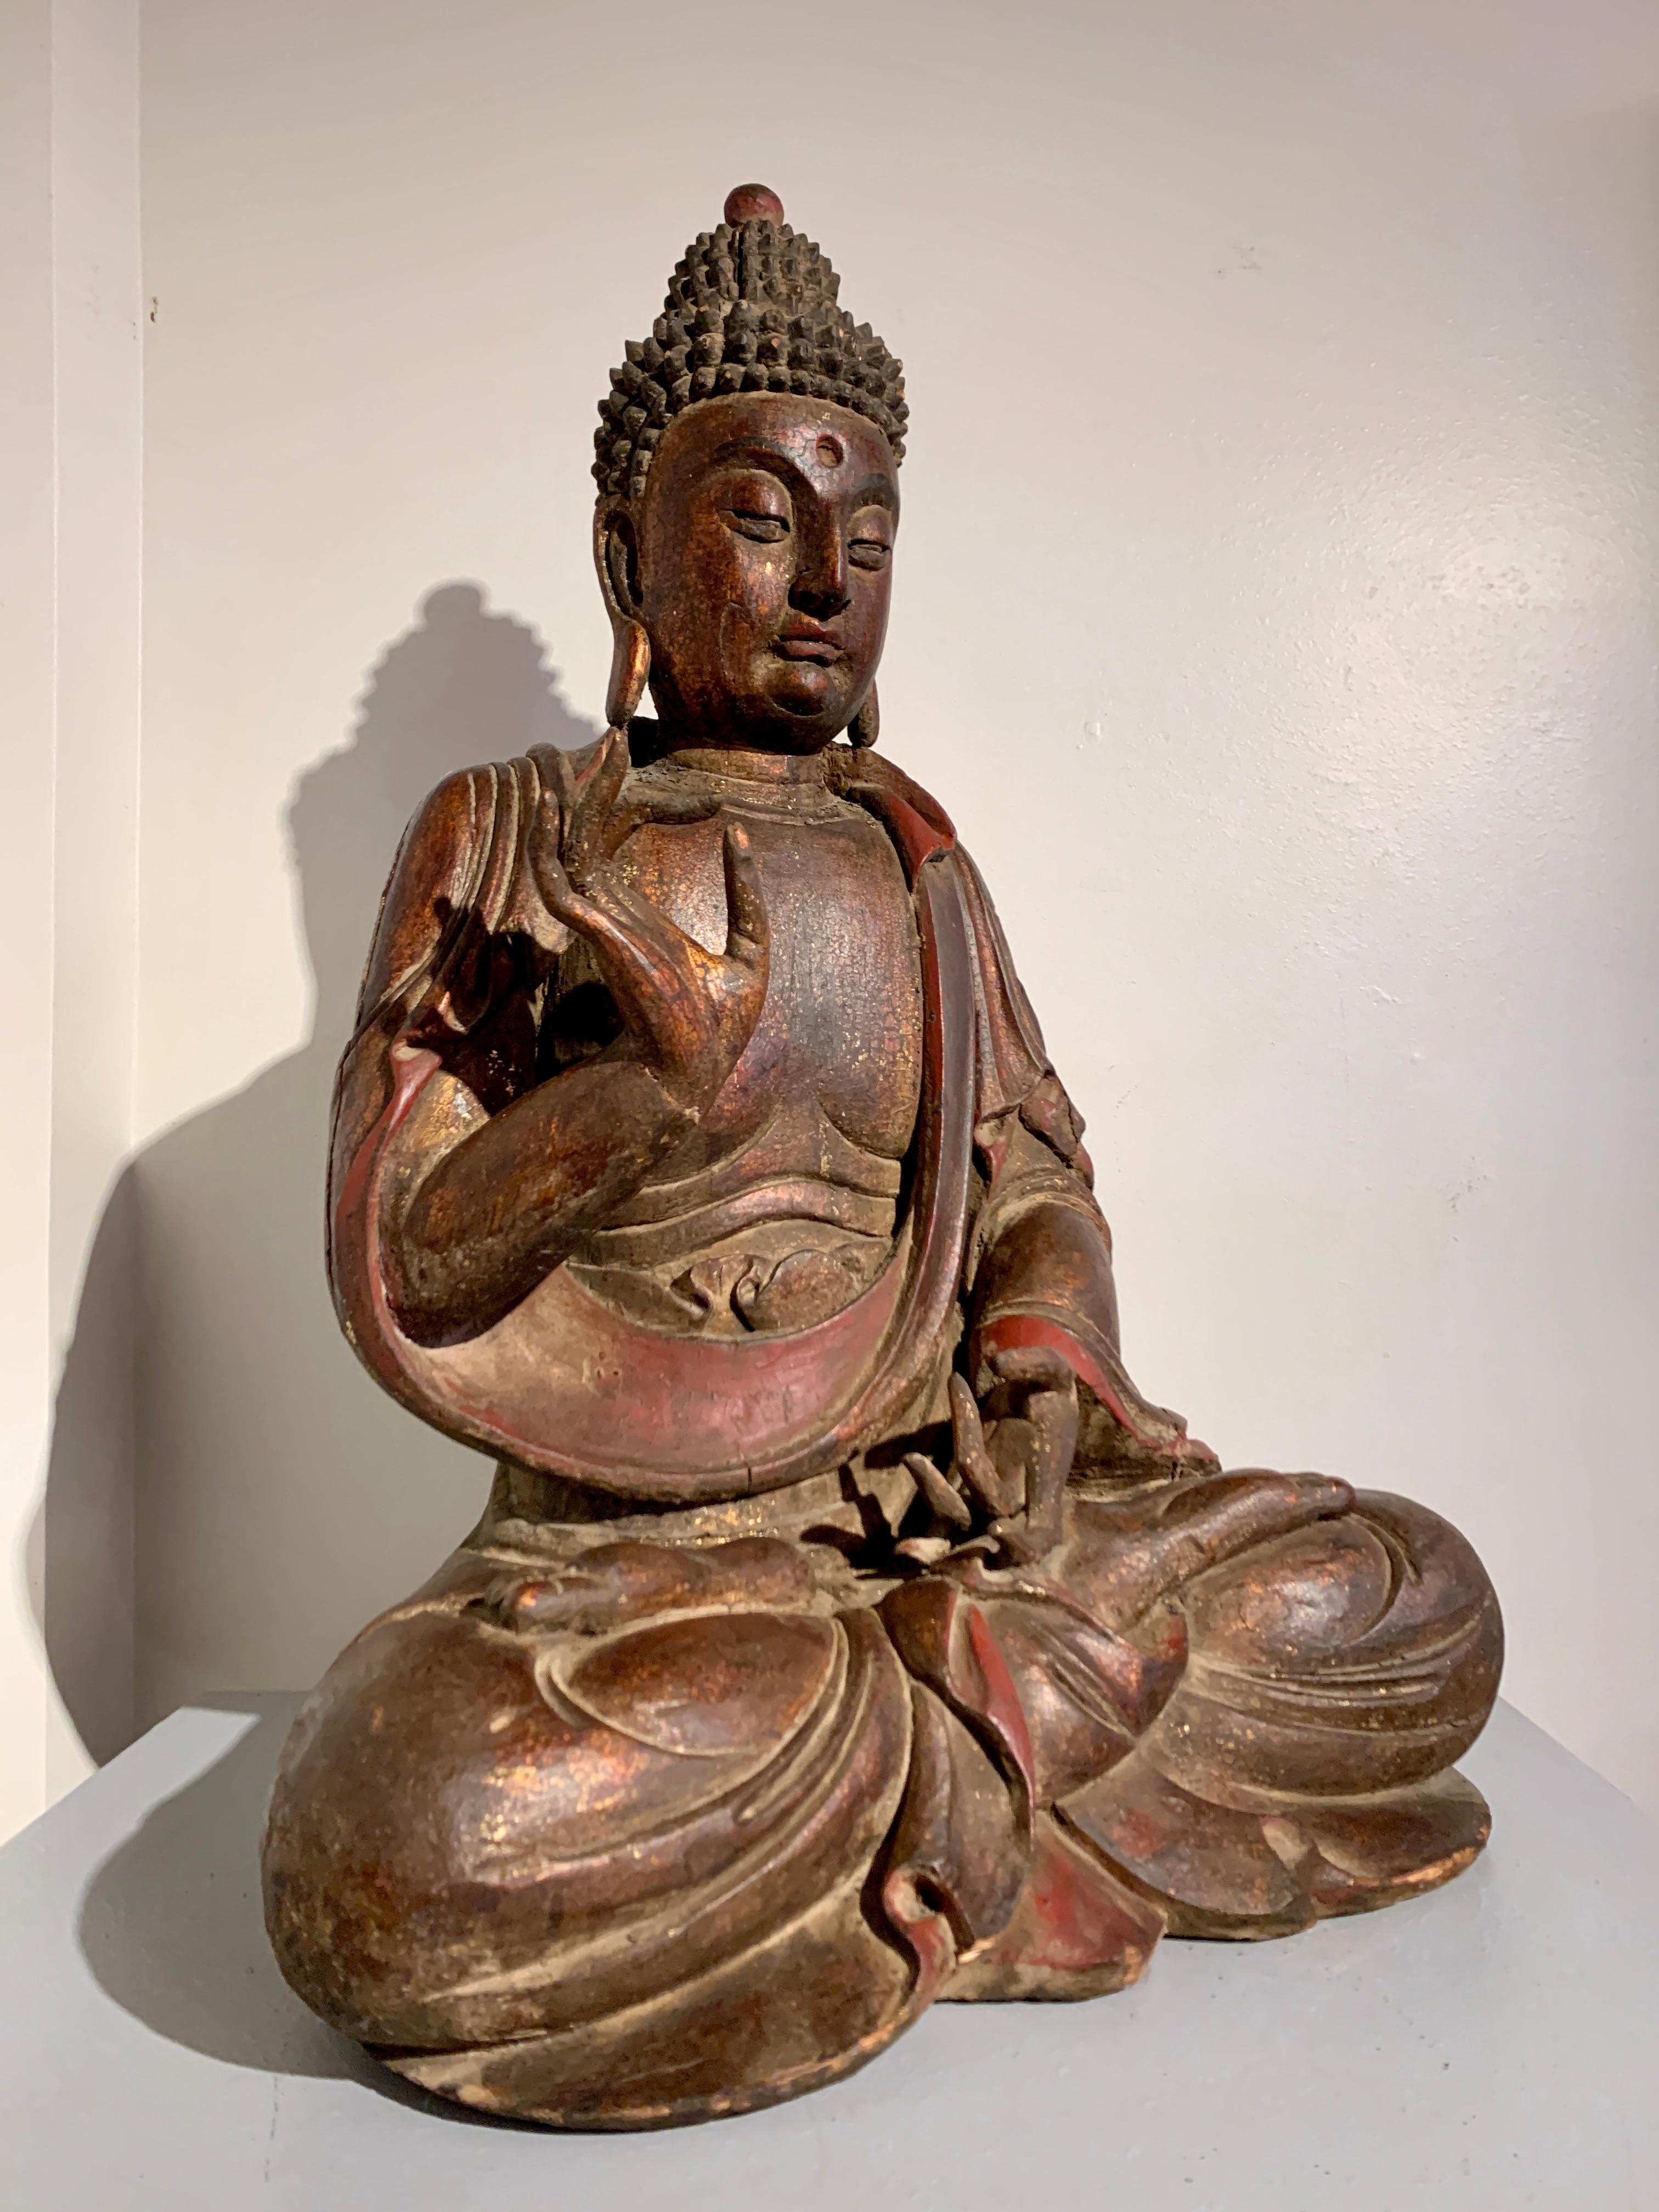 A large and magnificent near life-sized Chinese carved and lacquered wood figure of a Buddha, Qing Dynasty, 19th century or earlier, southern China. 

The figure likely represents one of the Five Tathagatas, also known as Dhyani Buddhas or Wisdom